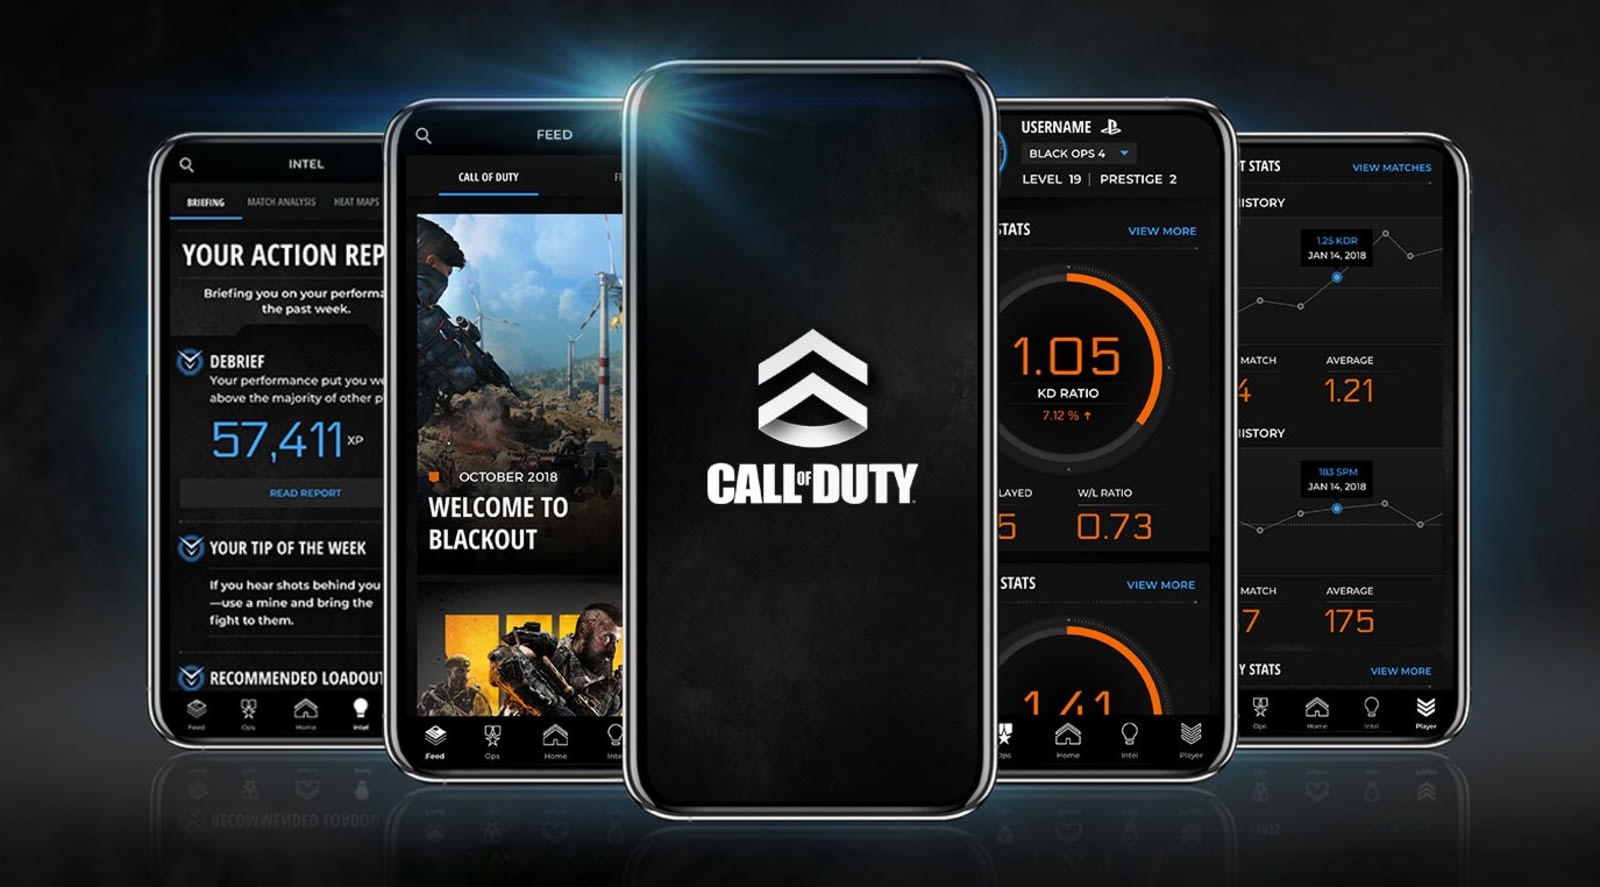 [2020] Free Cod Points & Credits Call Of Duty Mobile Apk Full Version Free Download